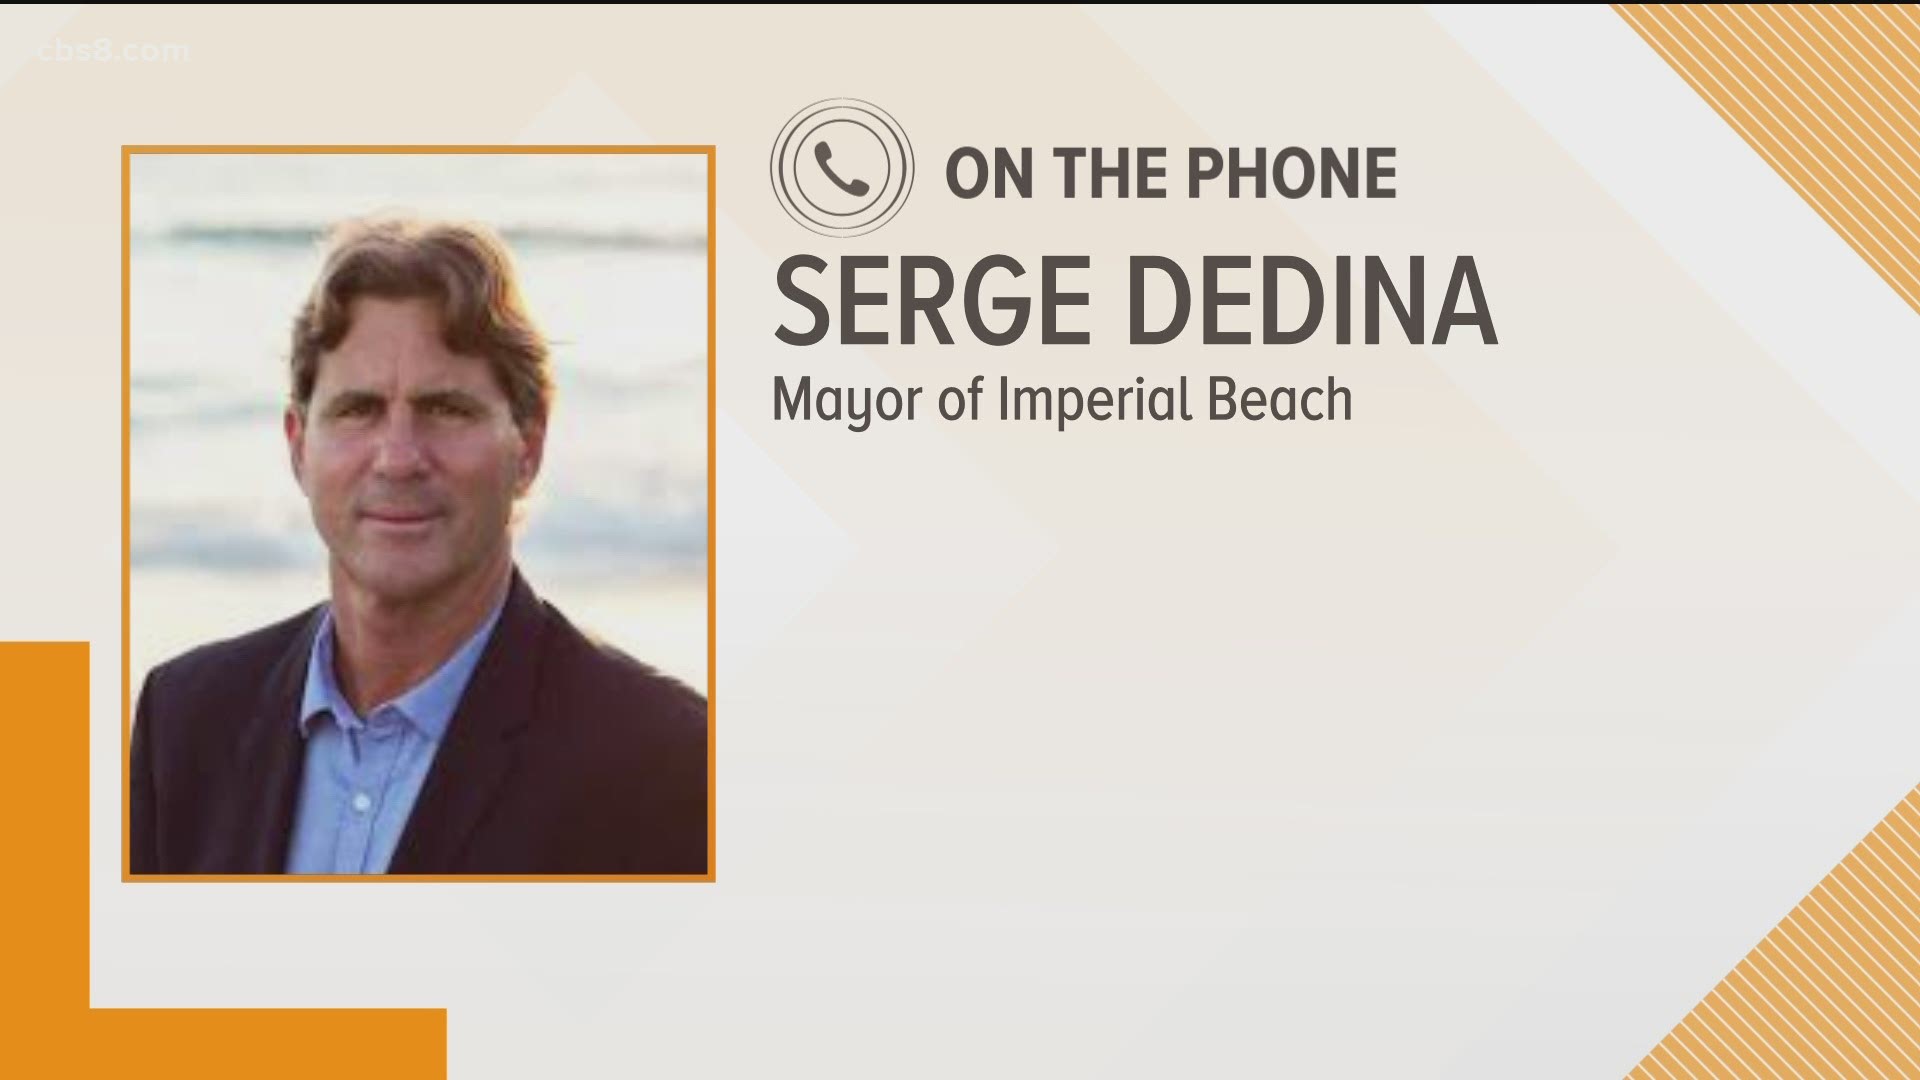 60 Minutes Lesley Stahl visited Imperial Beach to see the ongoing sewage problem firsthand and talk to Mayor Serge Dedina.